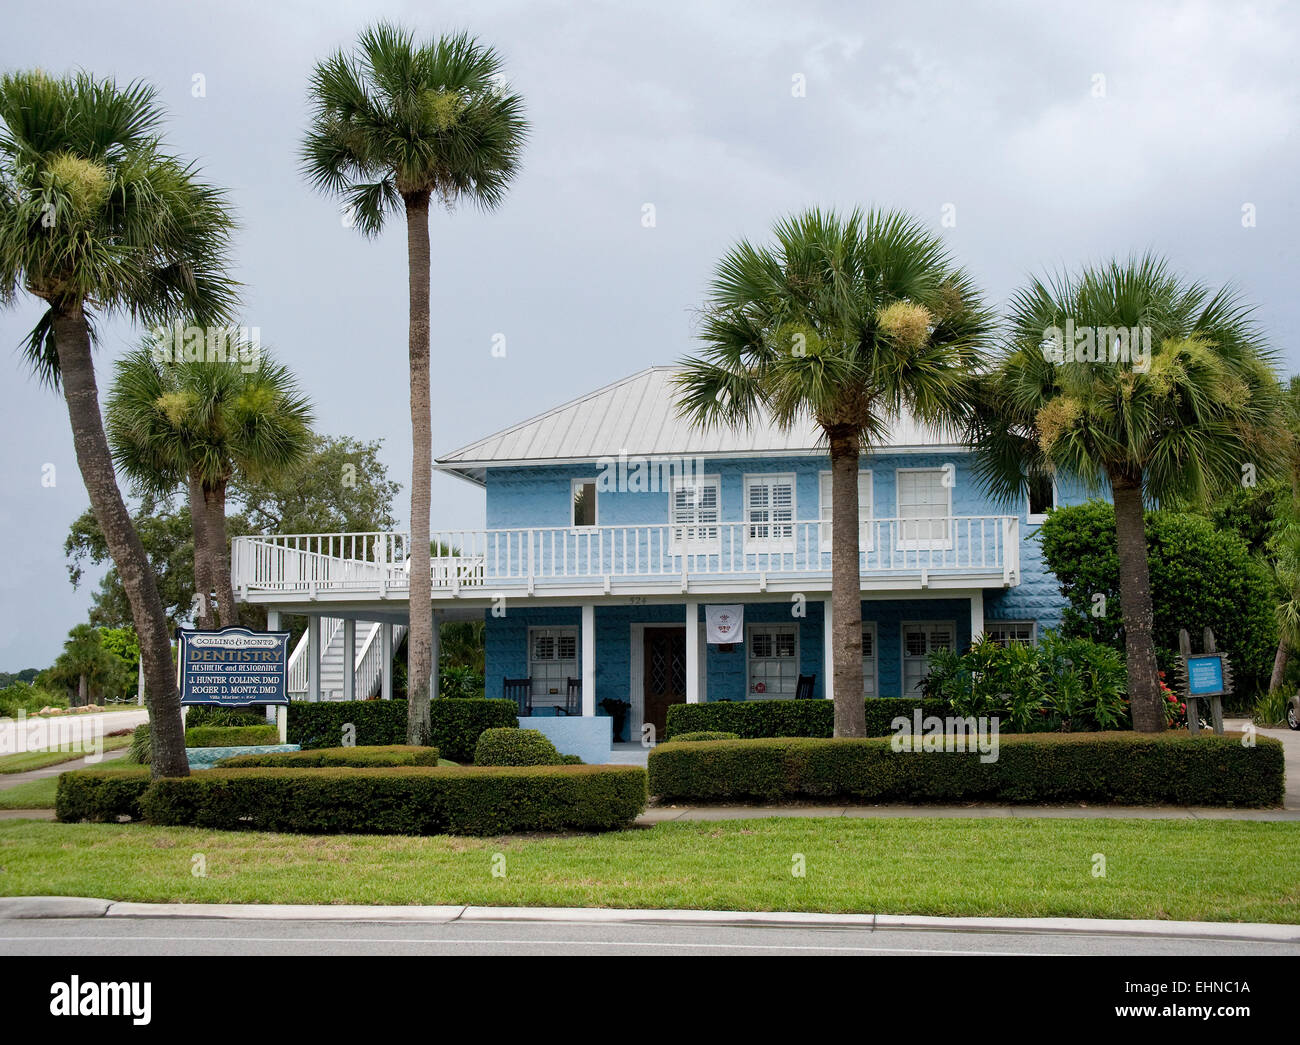 One of the typical buildings in Melbourne, Florida, east coast US Stock Photo